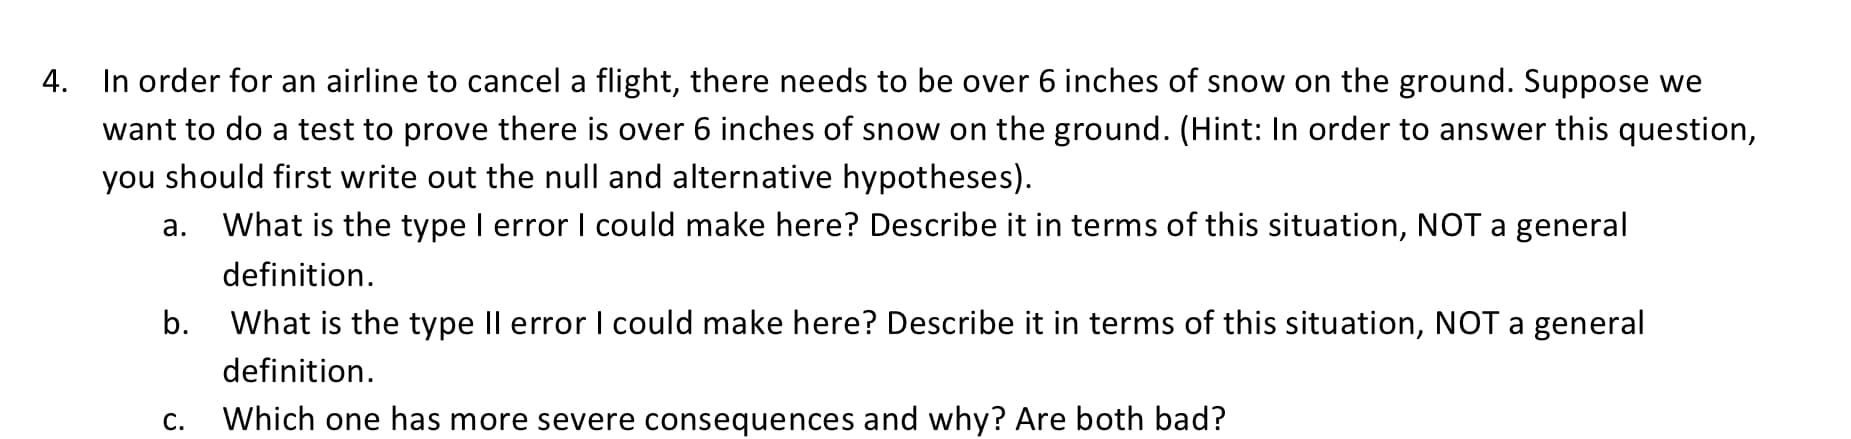 In order for an airline to cancel a flight, there needs to be over 6 inches of snow on the ground. Suppose we
want to do a test to prove there is over 6 inches of snow on the ground. (Hint: In order to answer this question,
you should first write out the null and alternative hypotheses).
What is the type I error I could make here? Describe it in terms of this situation, NOT a general
а.
definition.
